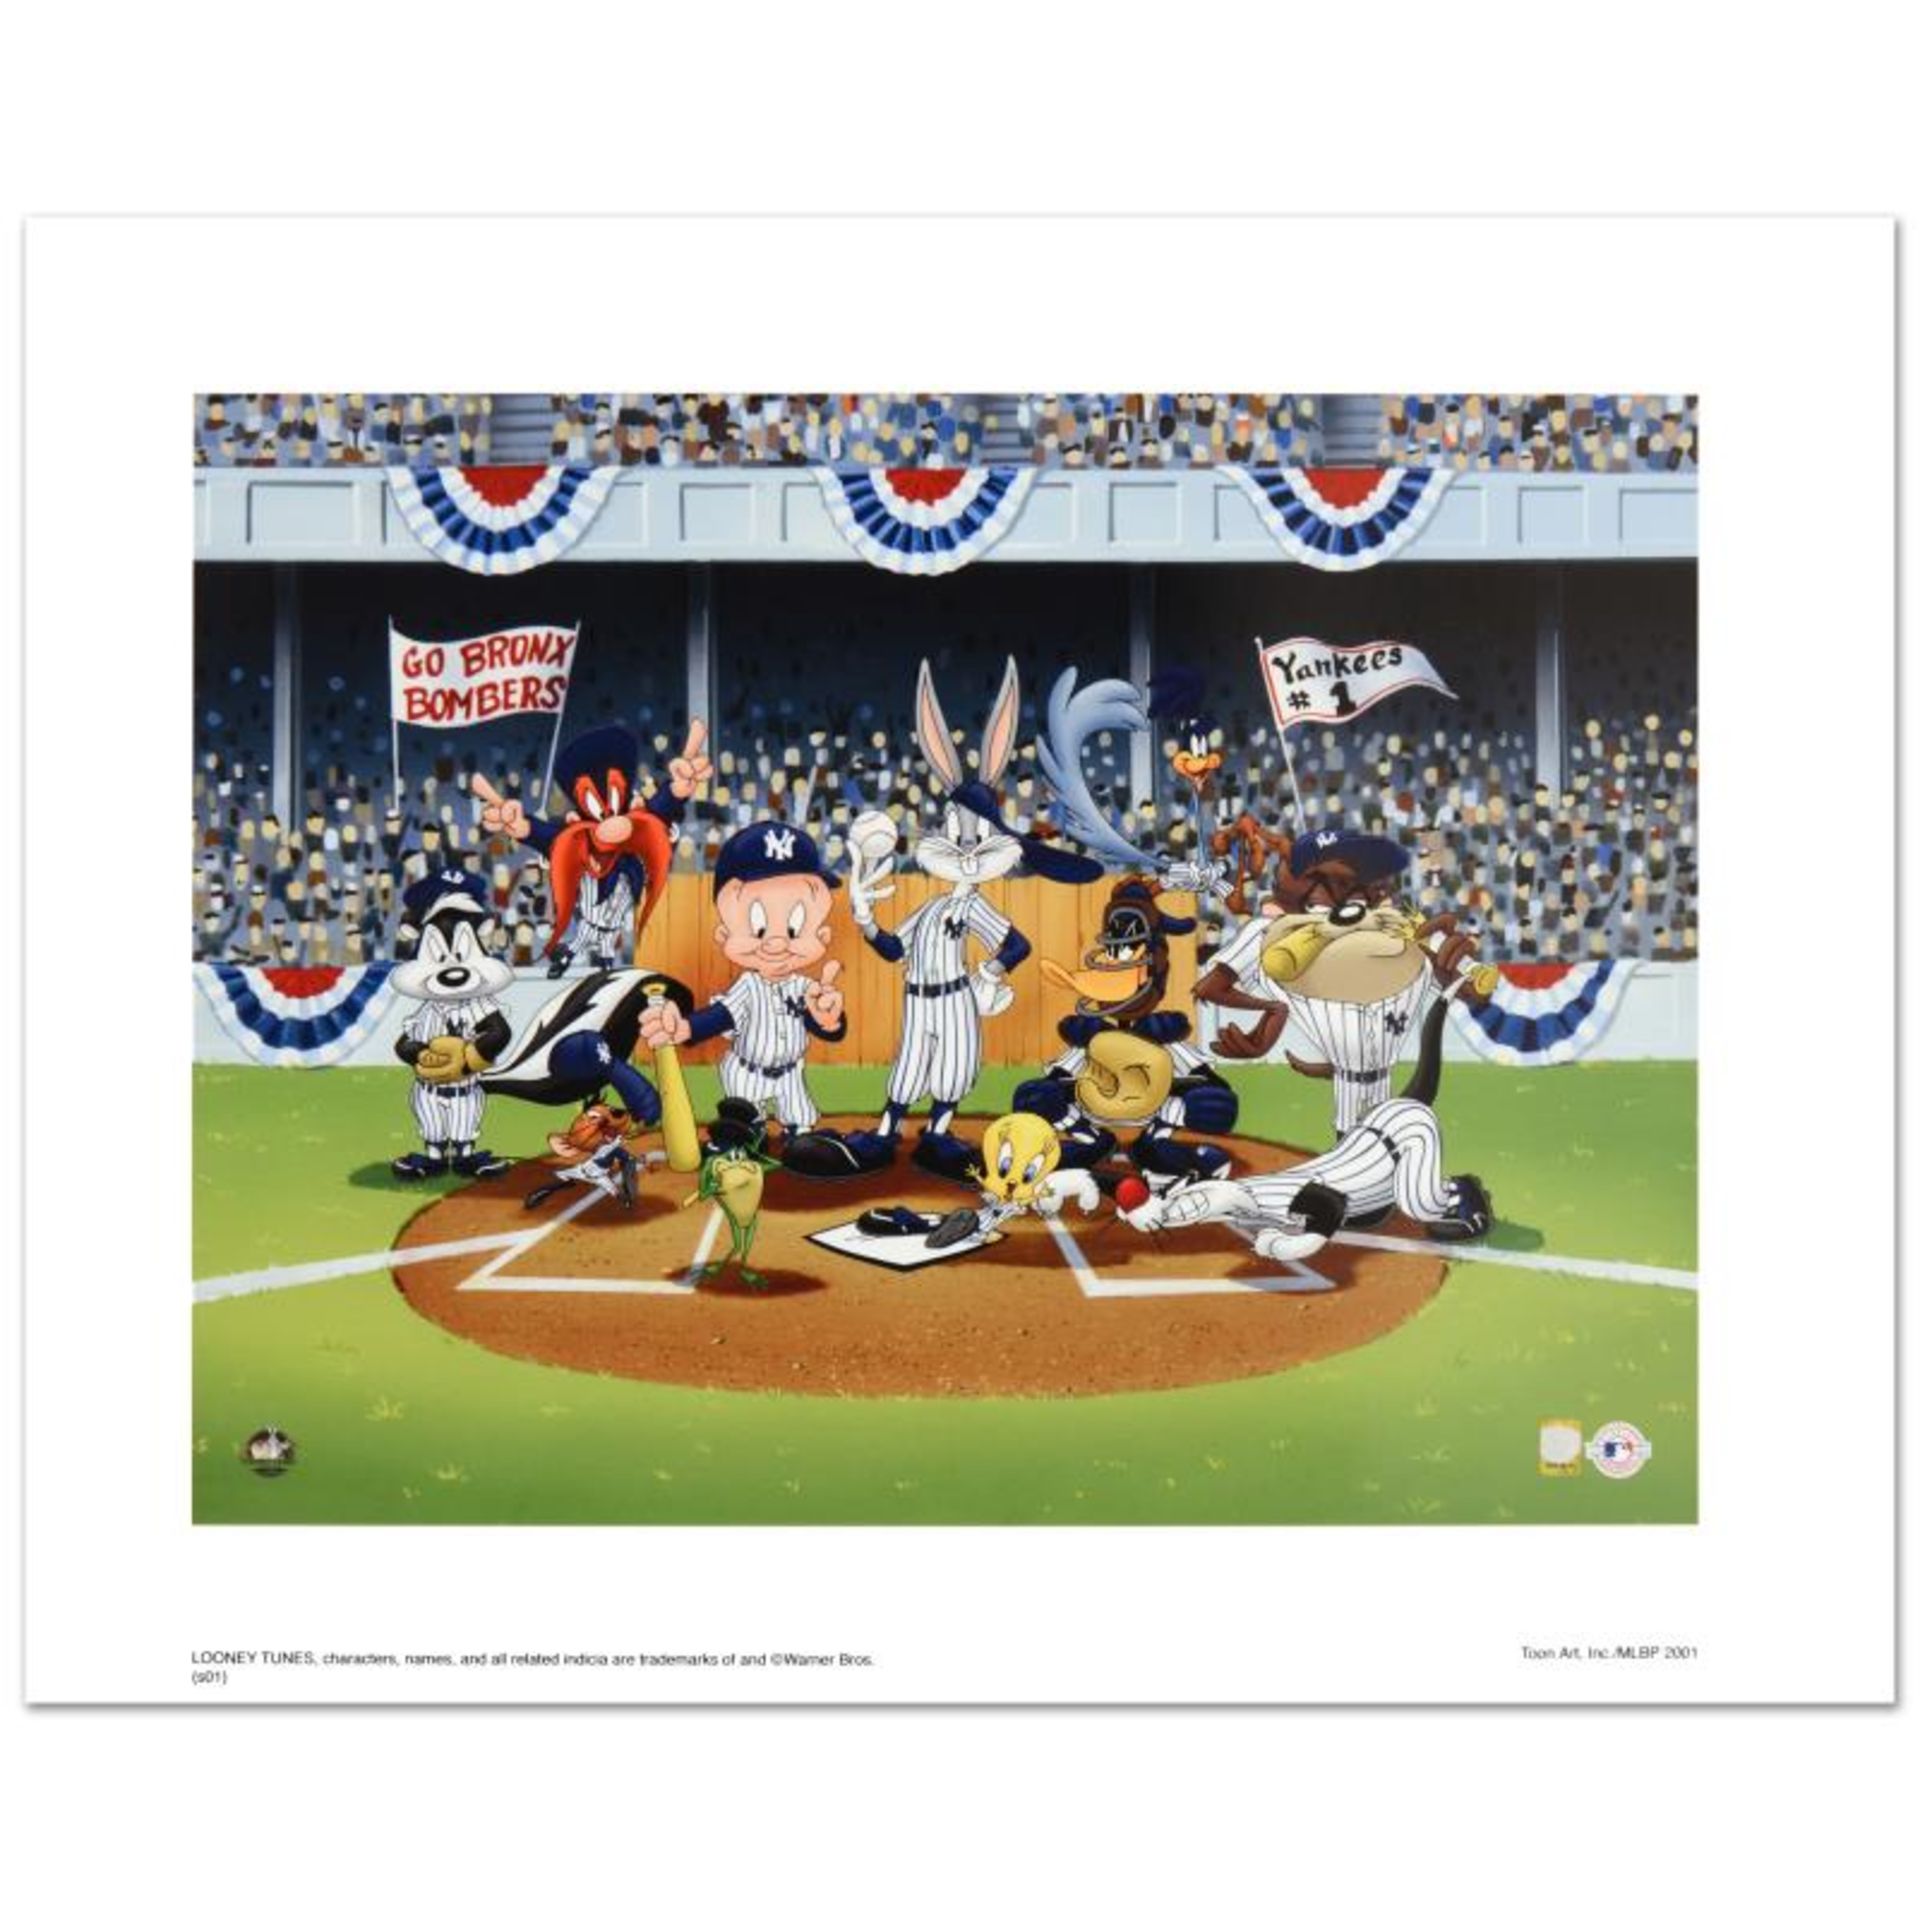 "Line Up At The Plate (Yankees)" is a Collectible Lithograph from Warner Bros. w